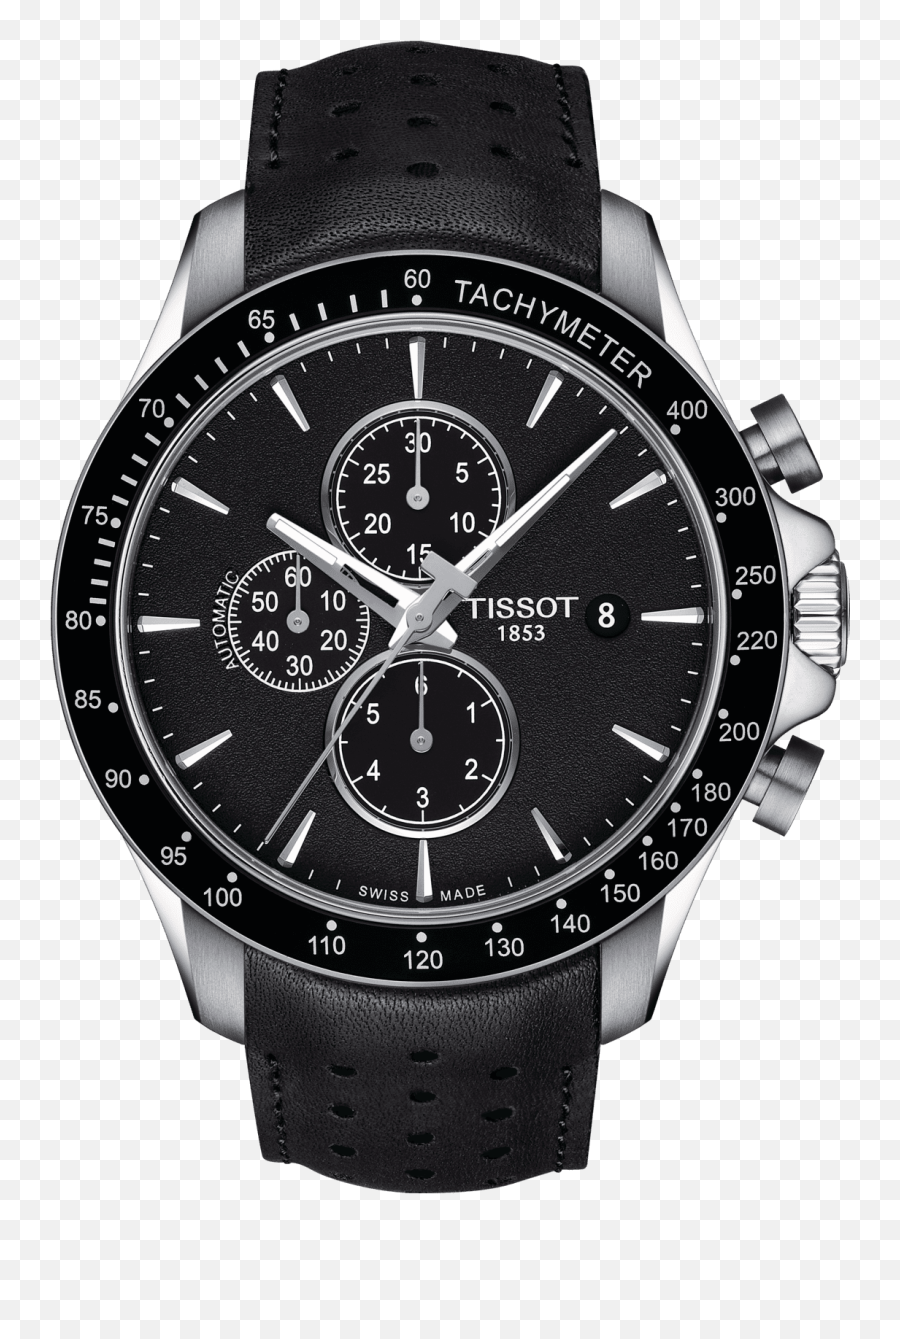 Buying Top Swiss Replica Watches Bracelet - Tissot V8 Automatic Chronograph Png,Lrg Icon Series Watch